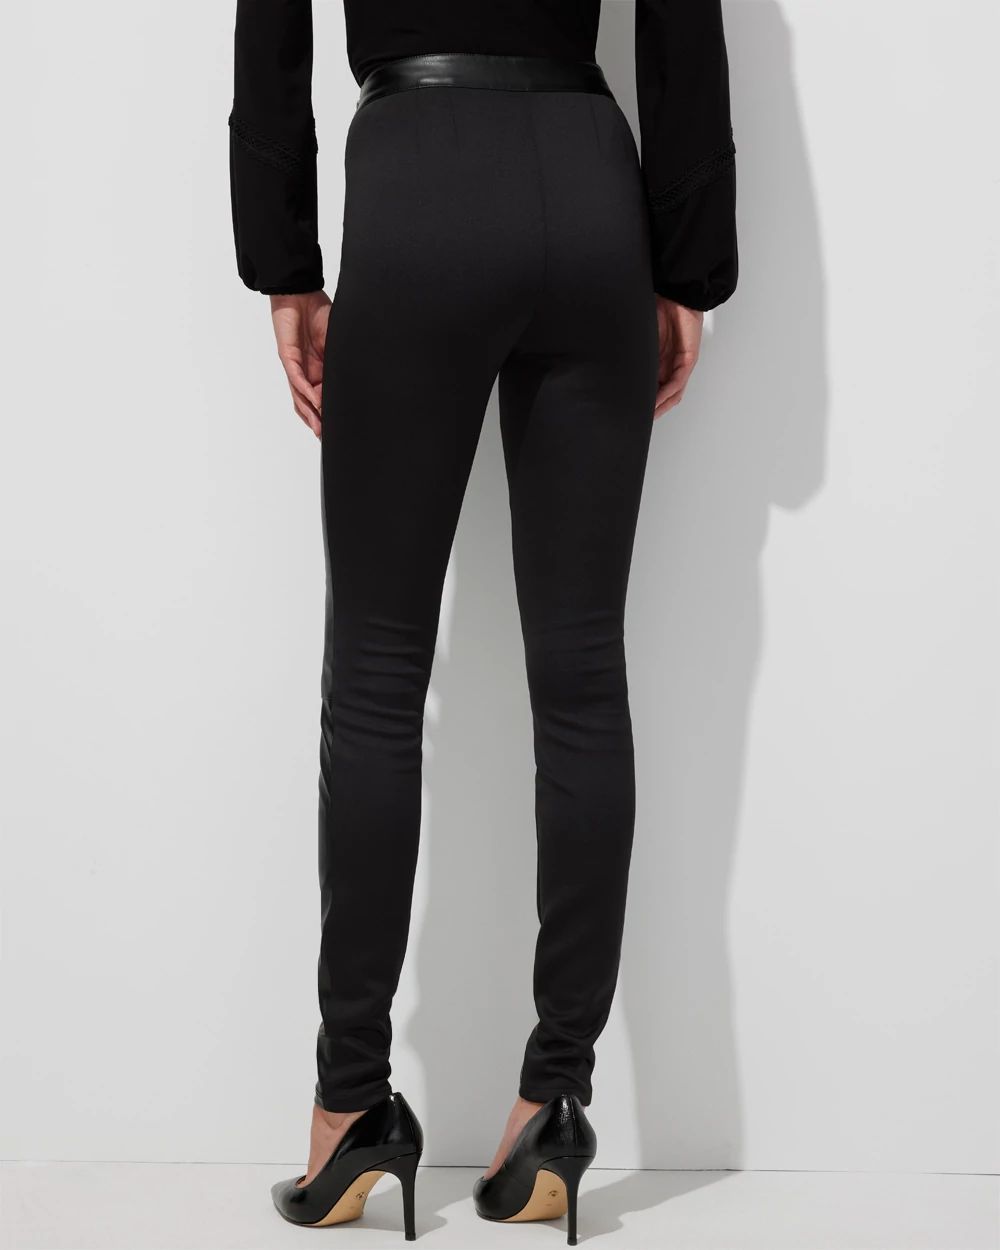 Outlet WHBM Faux Leather Legging